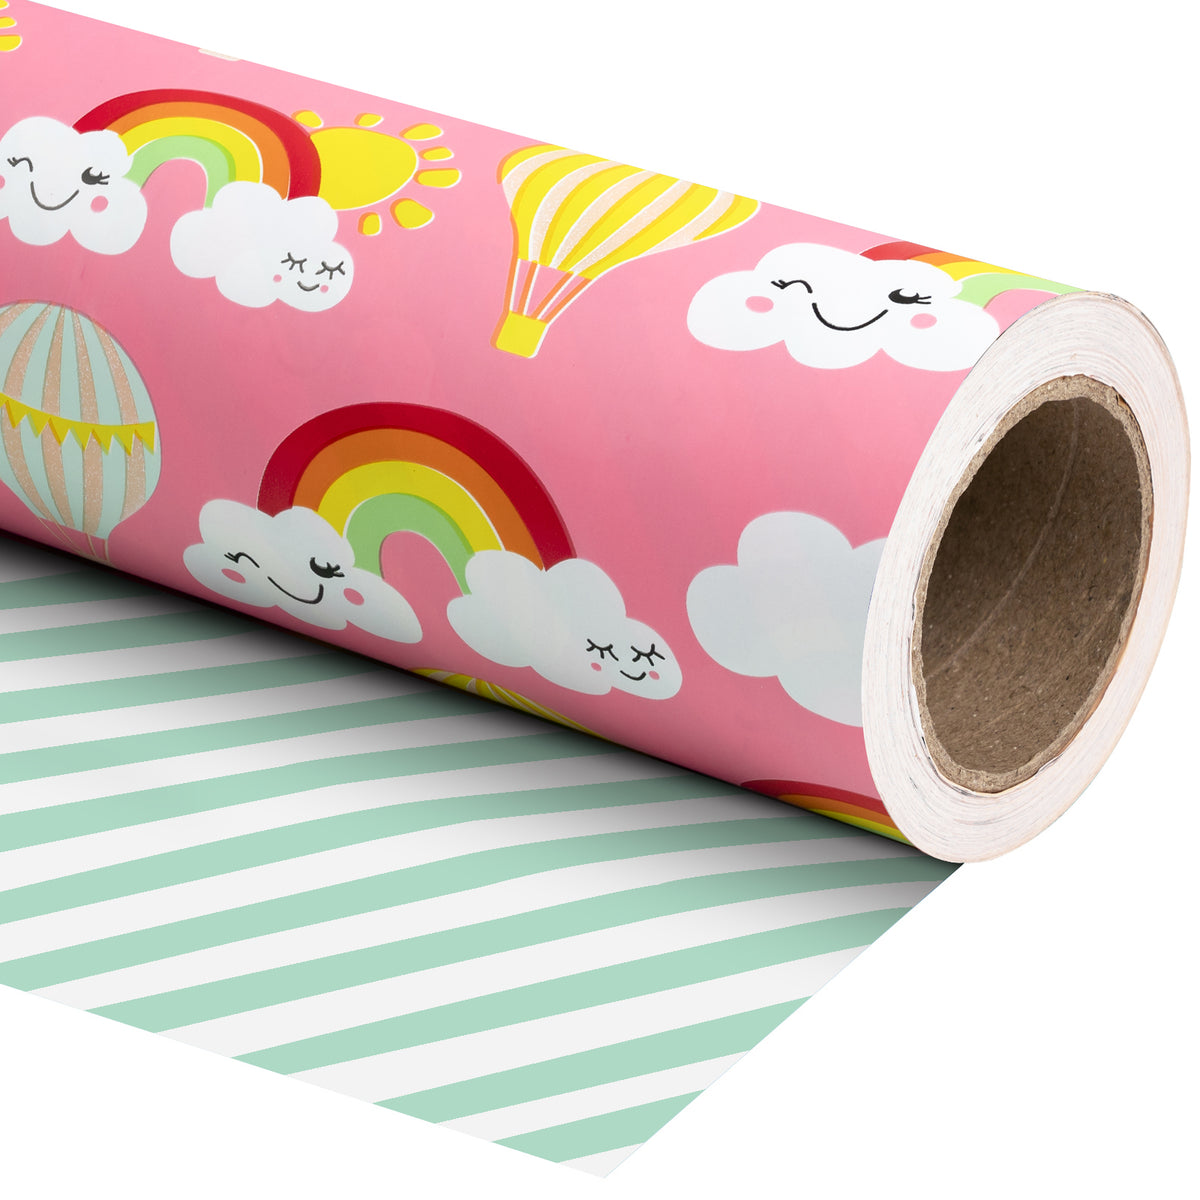 Reversible Black or White Happy Birthday Rainbow Wrapping Paper